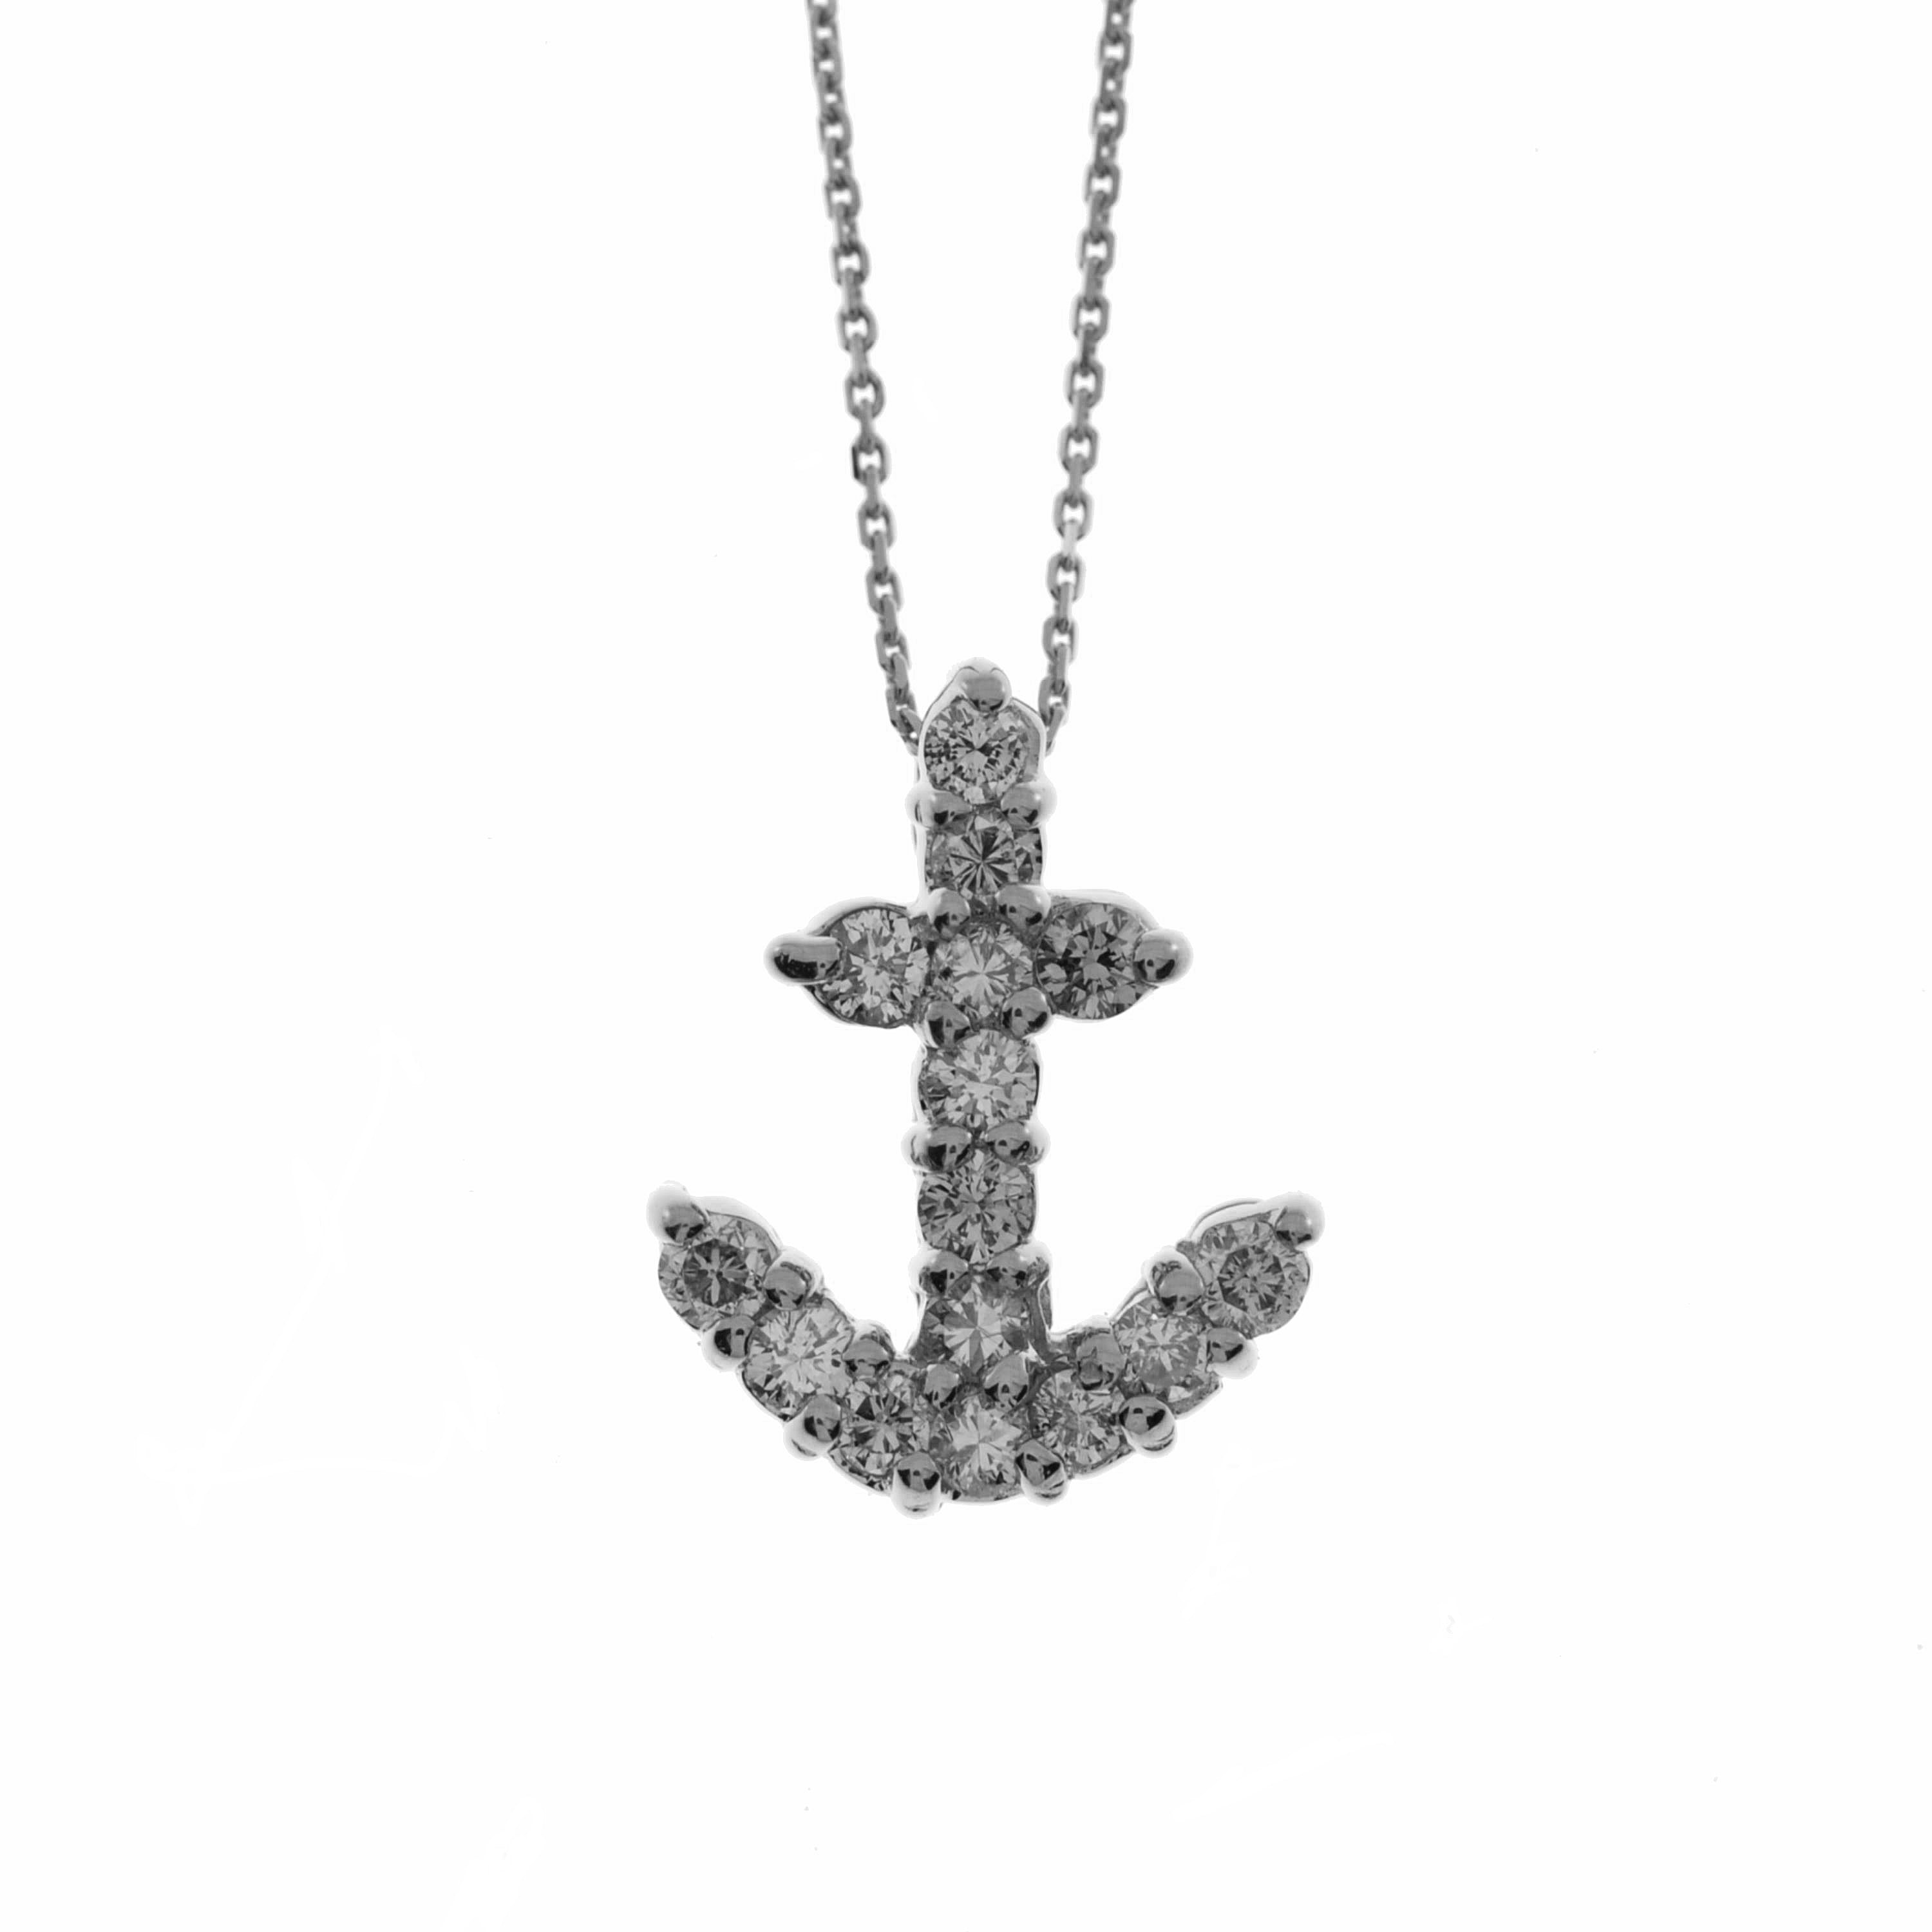 14Kt Gold 0.35 Ct Genuine Natural Diamond Anchor Cross Pendant Necklace